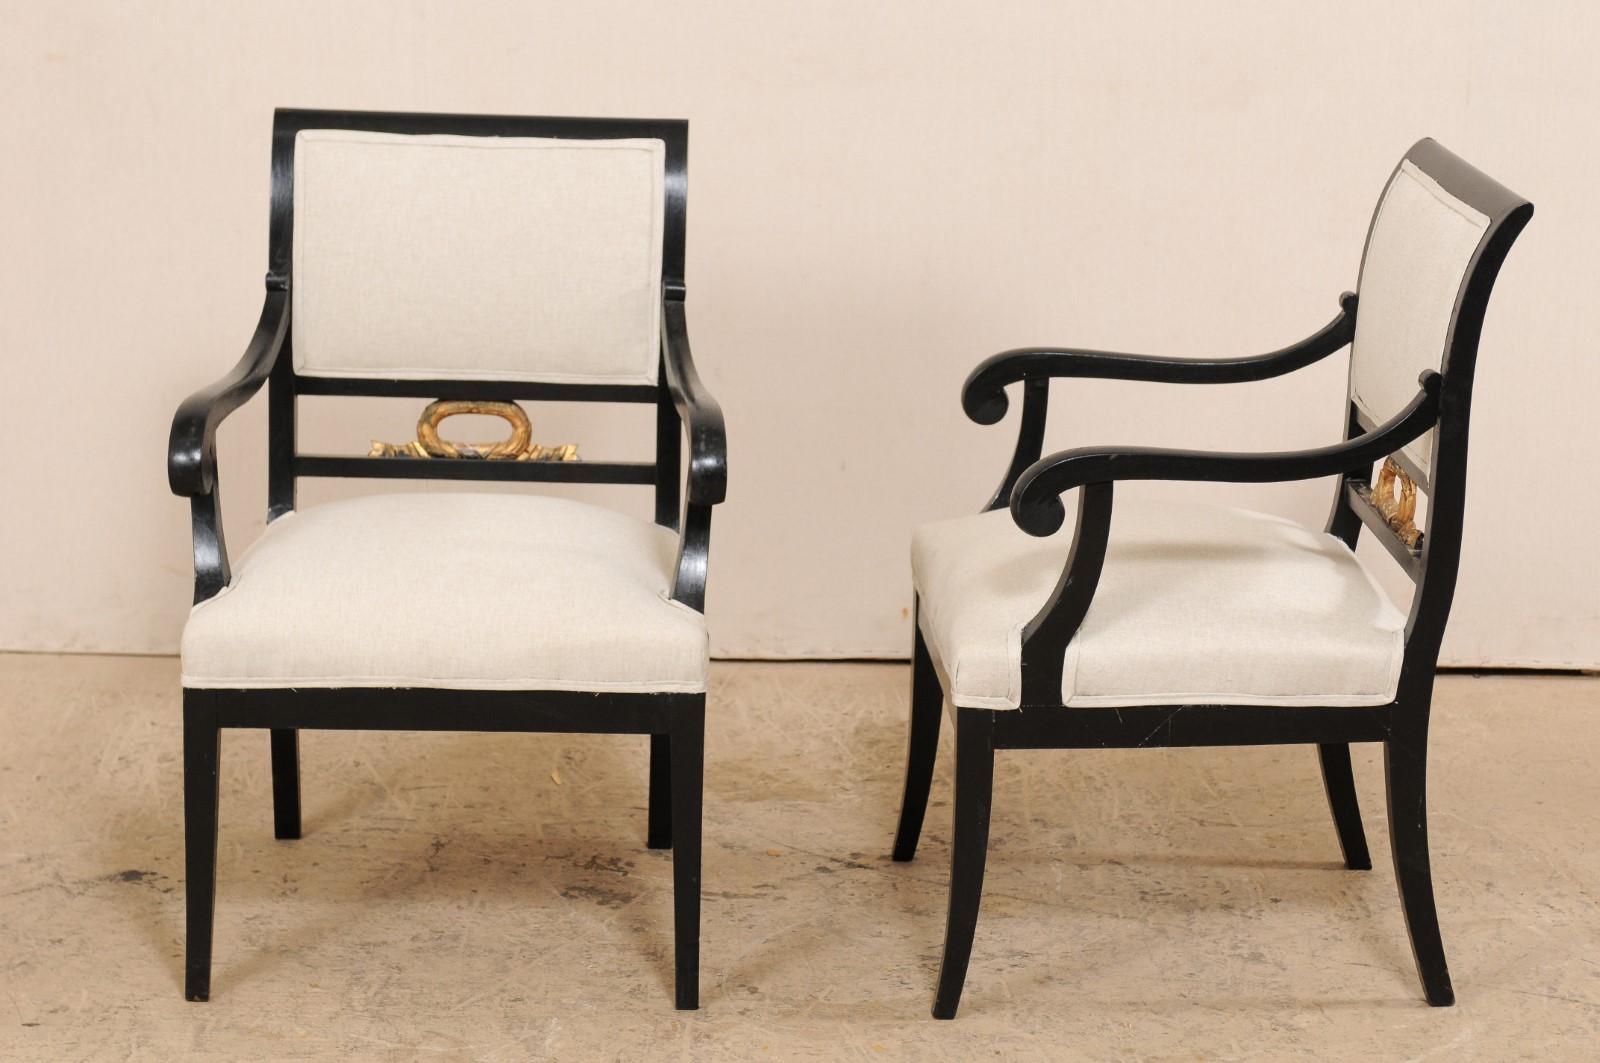 Pair of Swedish Empire Armchairs in Black w/Gold Accents from the Mid-19th C. For Sale 2